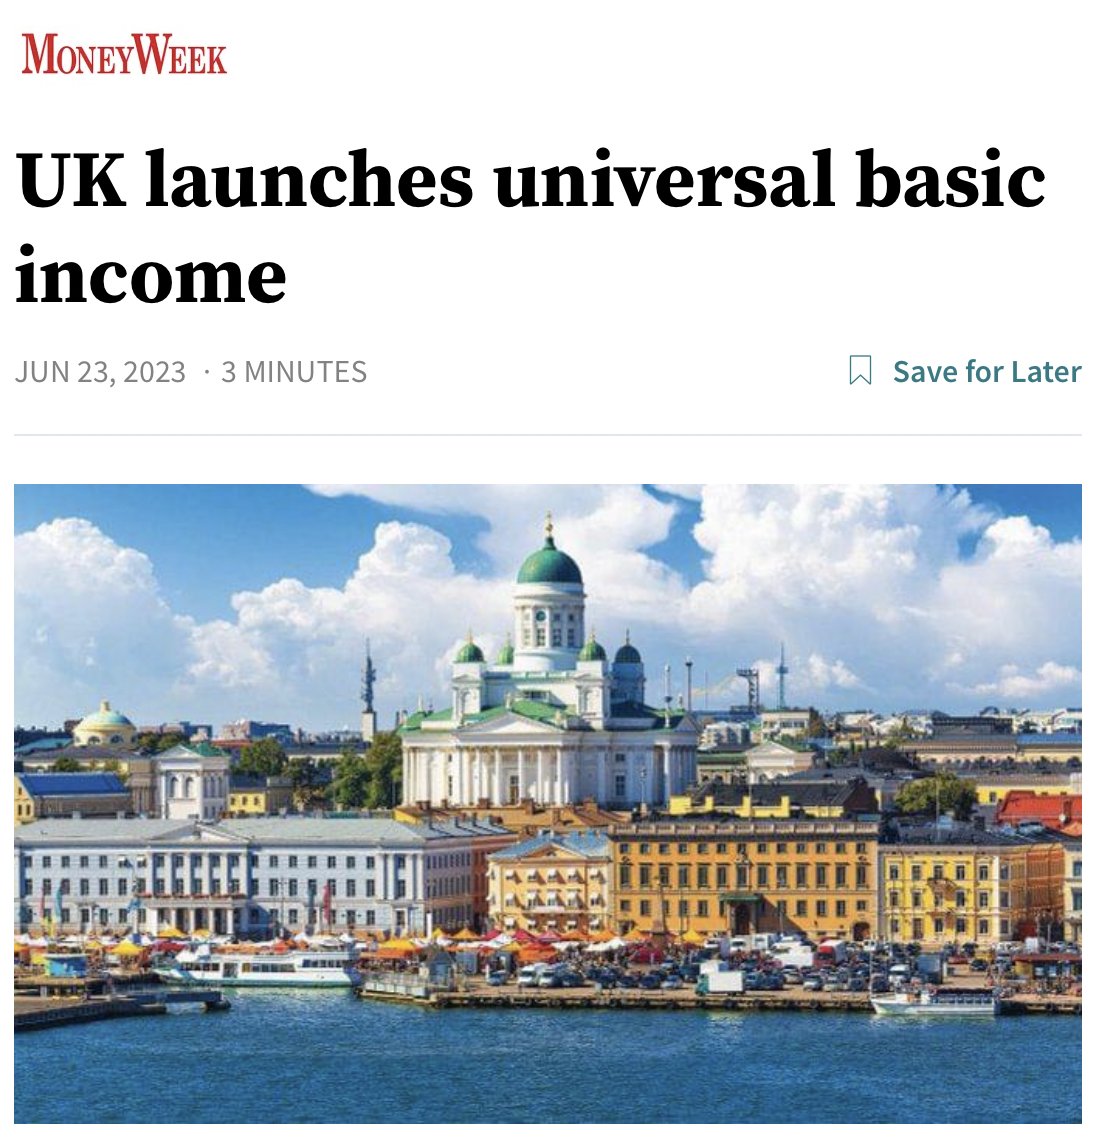 NEW: Thinktank Automony has announced the first pilot program testing a universal basic income (UBI) in🇬🇧 England 👀

Under the program, 'lucky' participants will be given £1,600 every month for two years, with 'no strings attached' 

What do you think this does to a society? 🤔